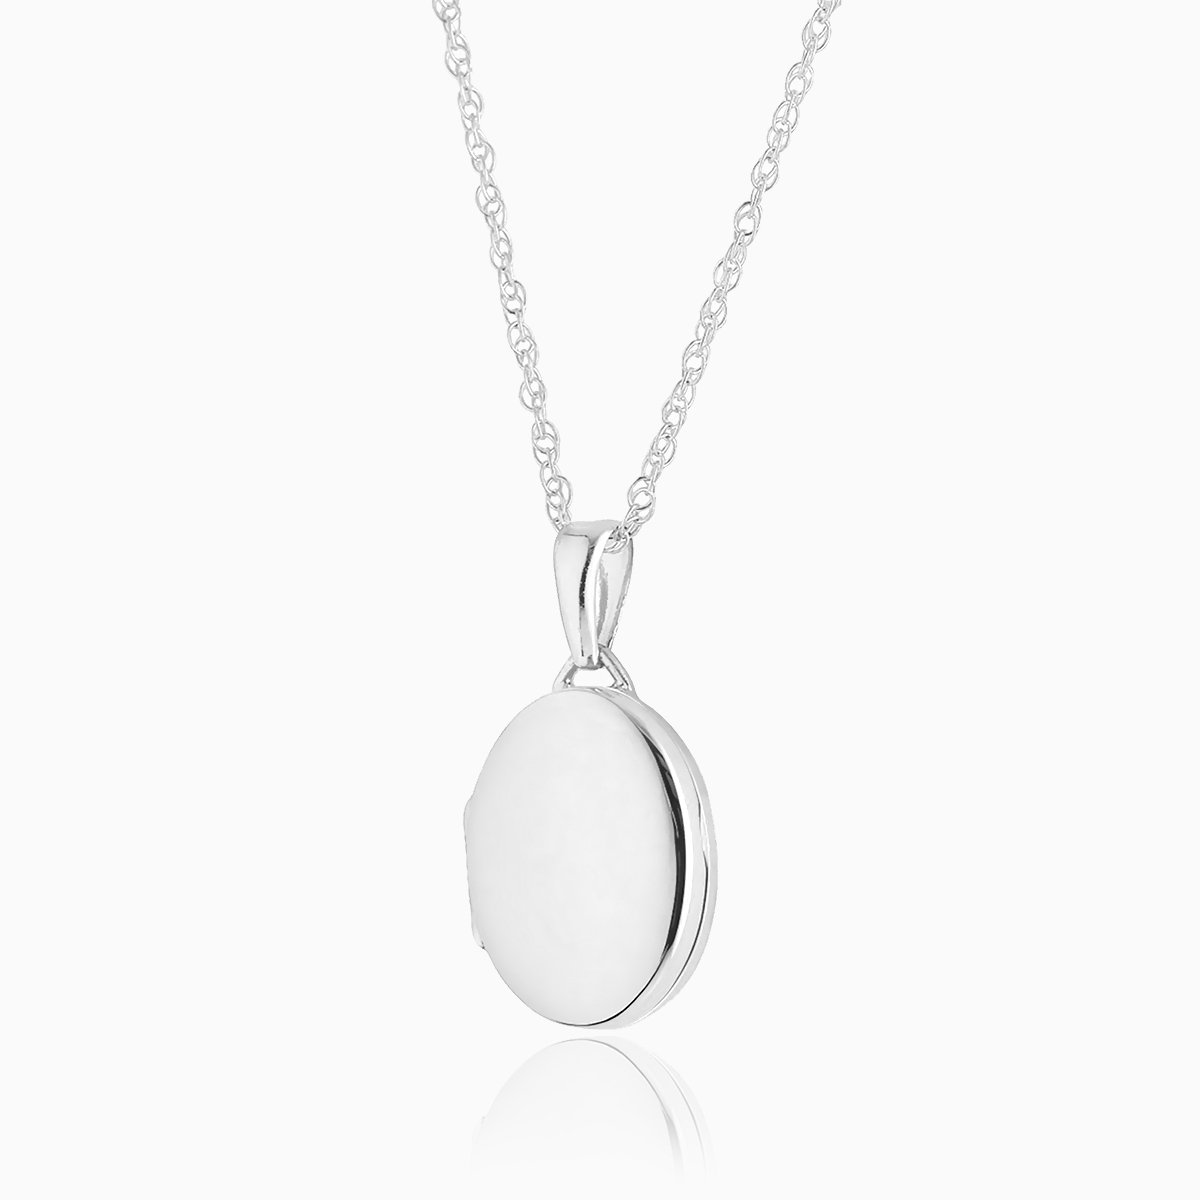 Product title: Dainty Silver Oval Locket, product type: Locket